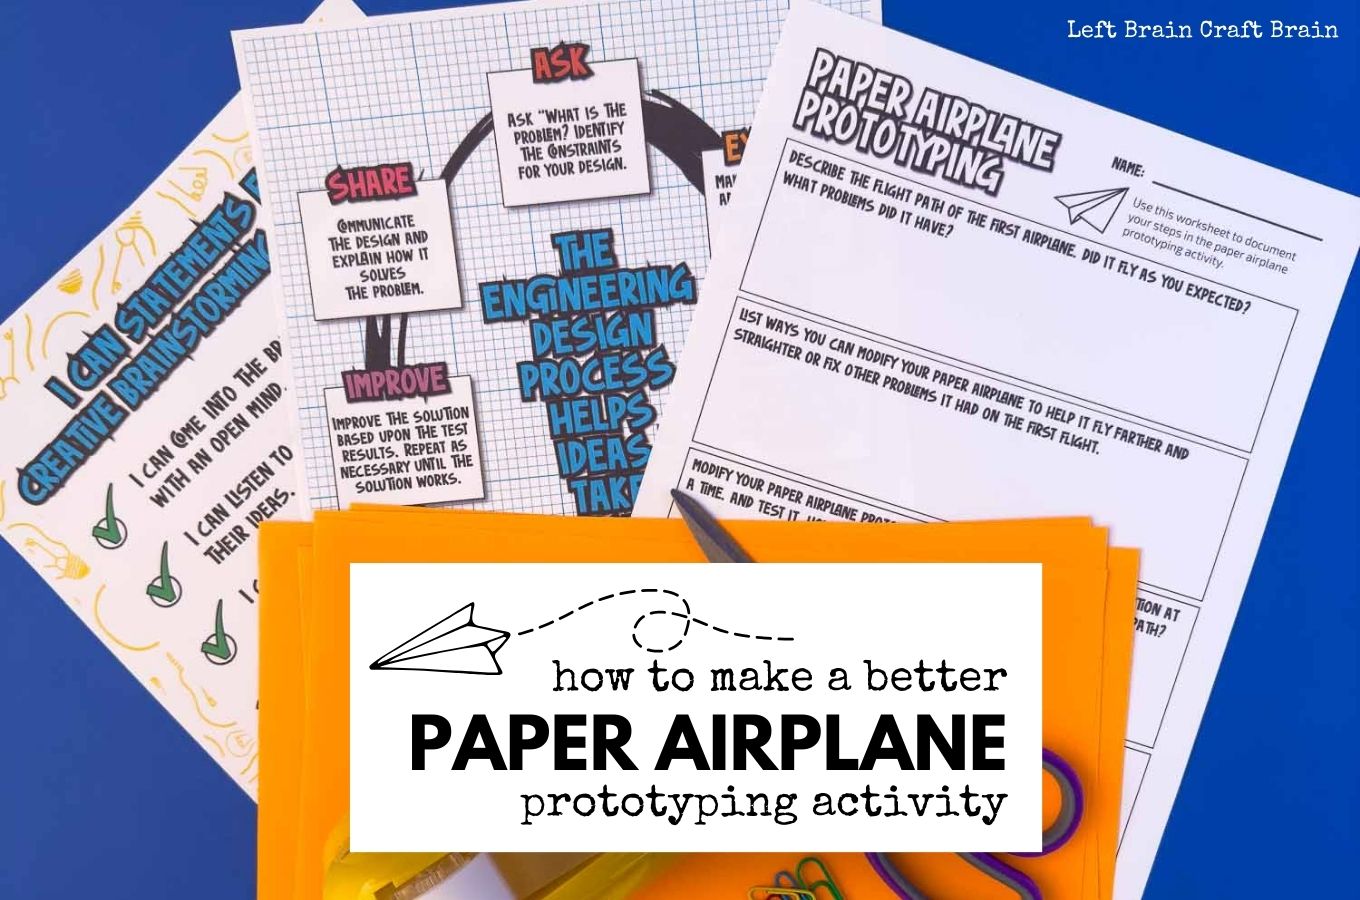 paper airplane prototyping opt-in 1360x900